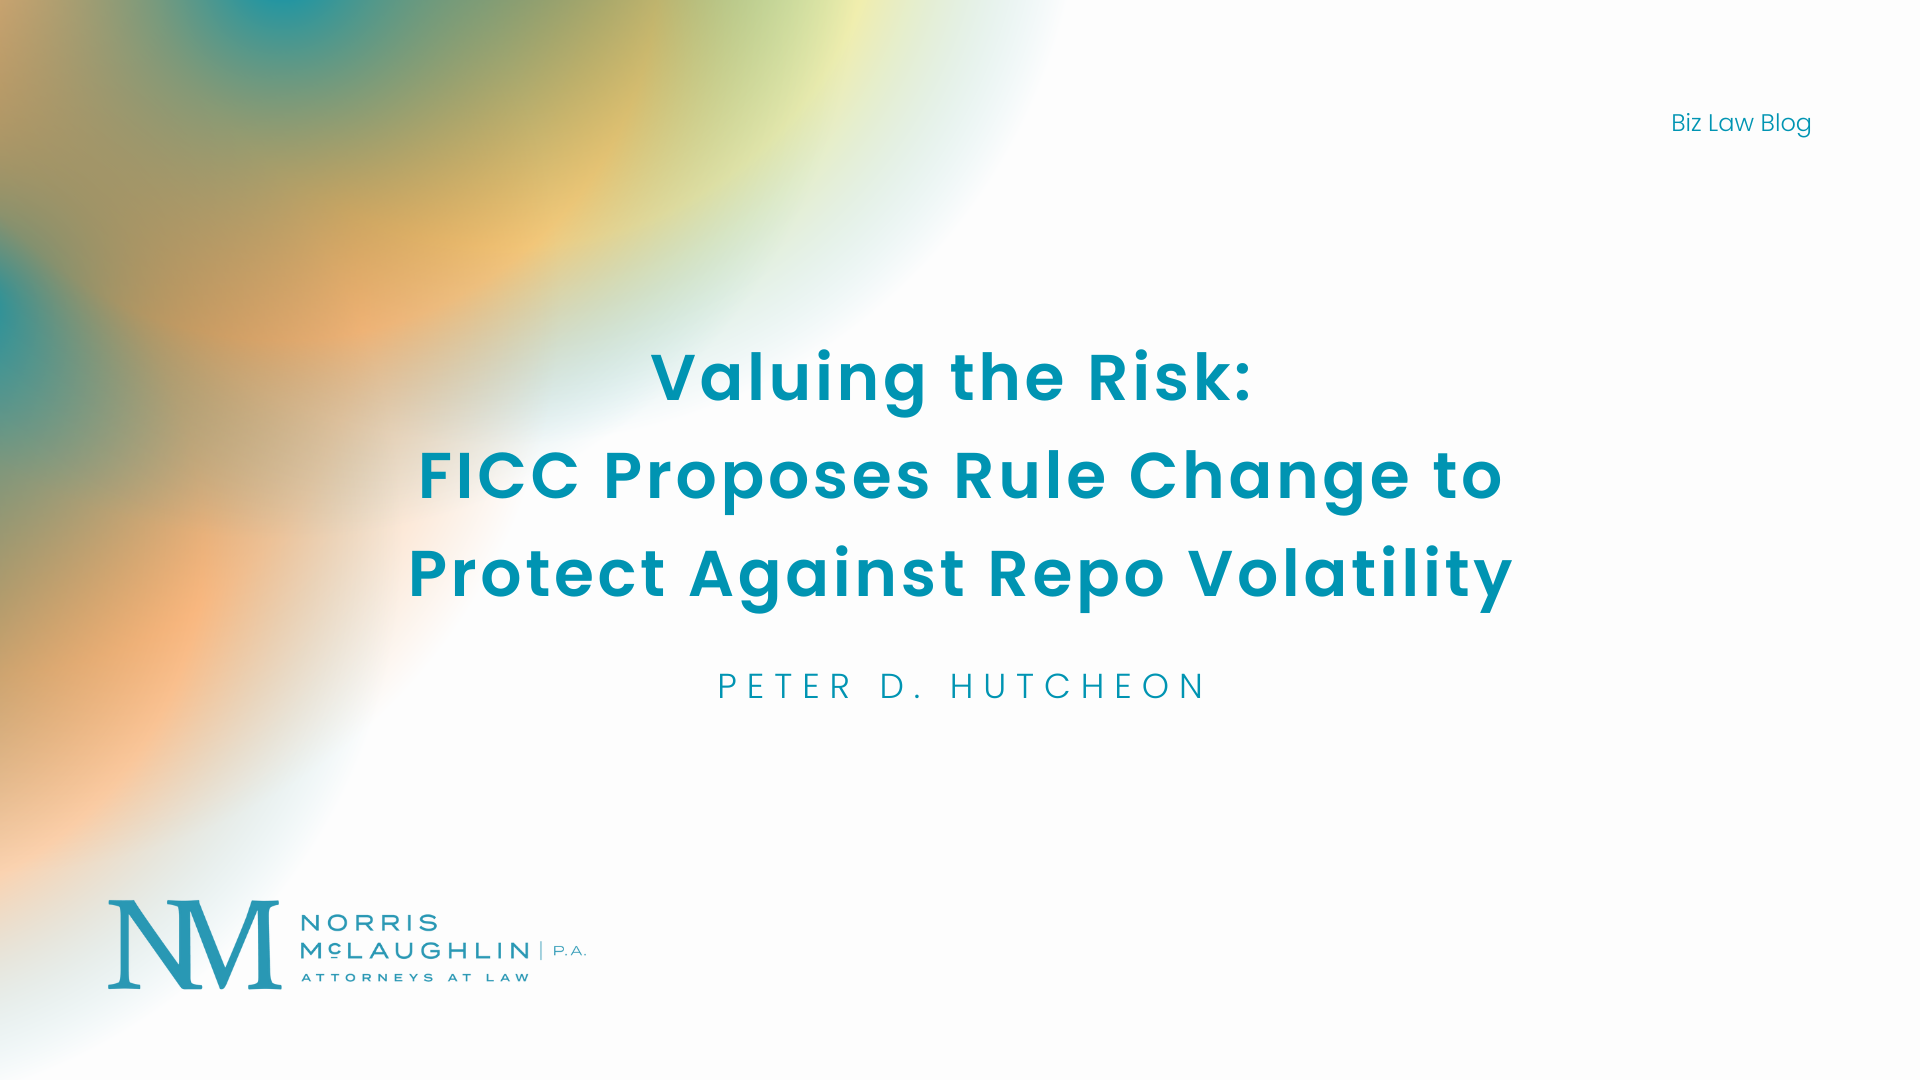 Valuing the Risk: FICC Proposes Rule Change to Protect Against Repo Volatility